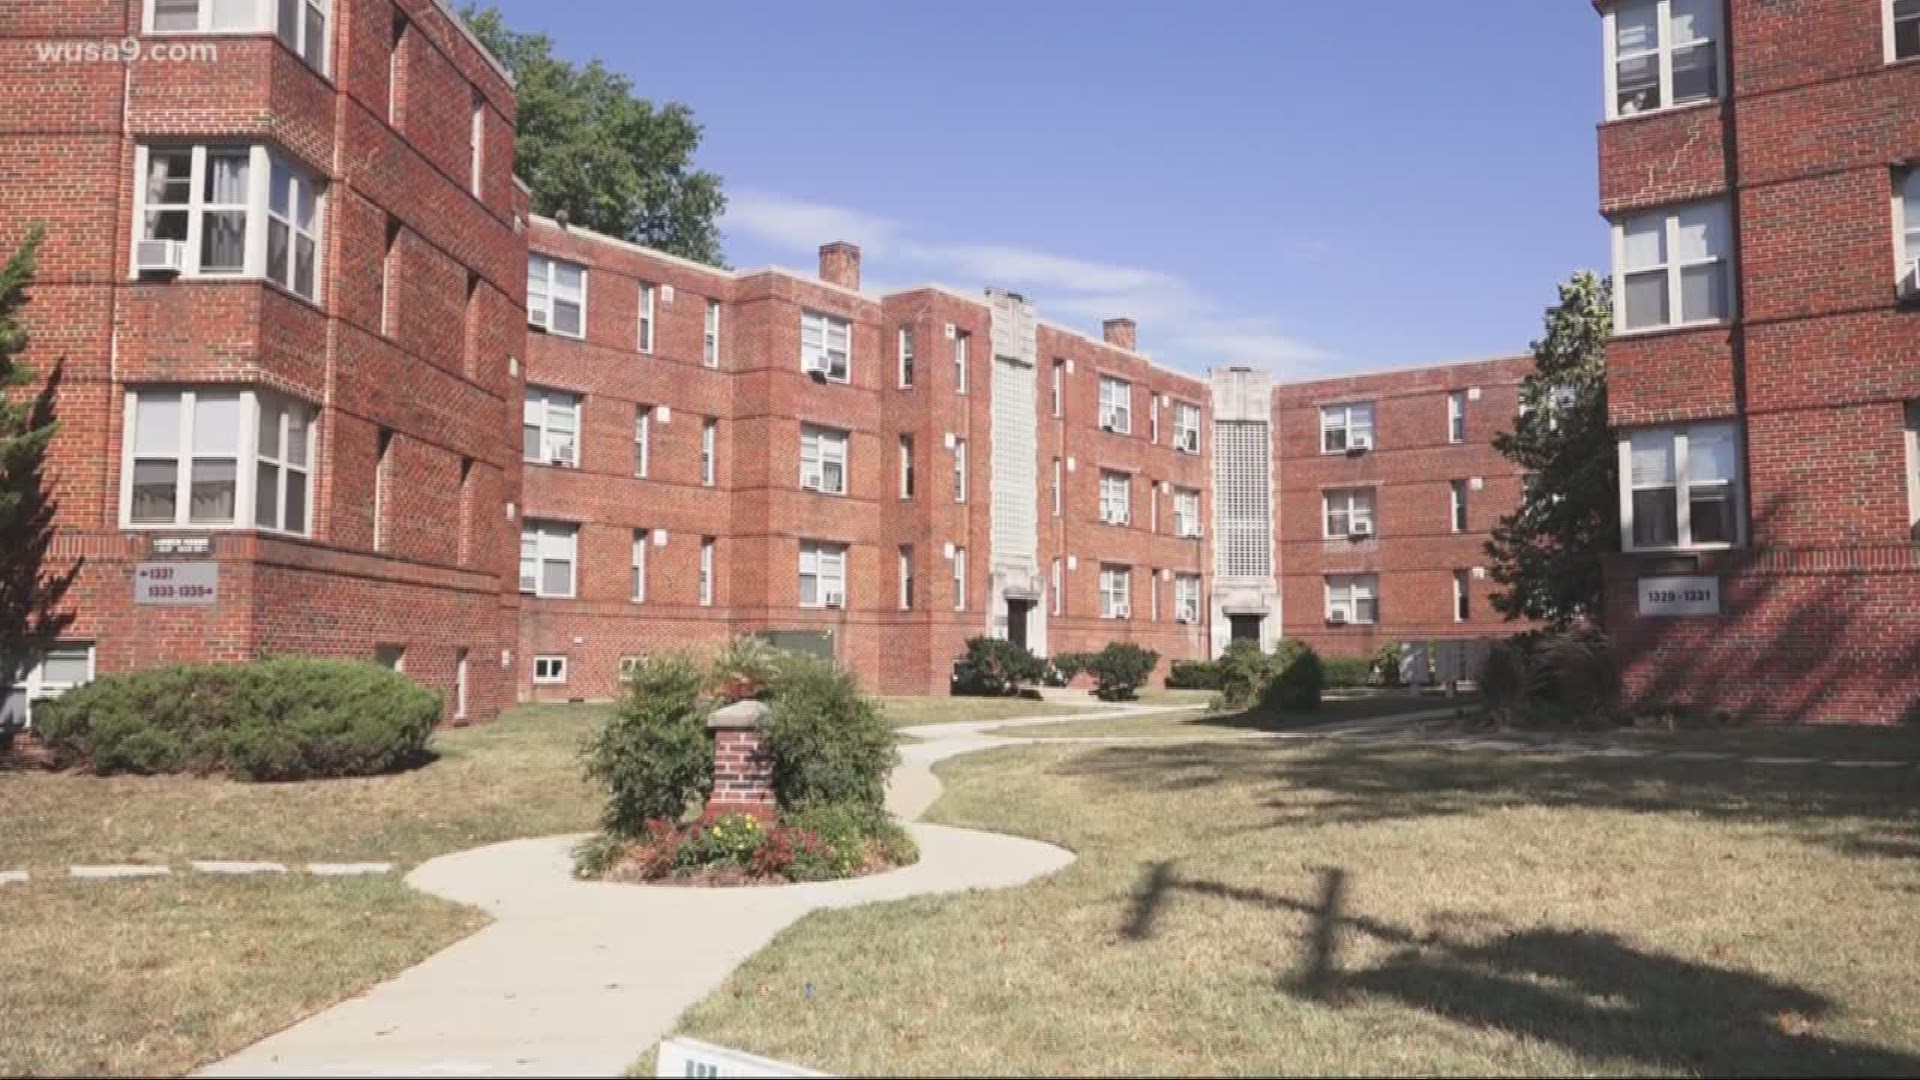 Mayor Bowser kicked off her plan to roll out new units in front of Fort Stevens, a building with preserved affordable housing units newly acquired by the District.